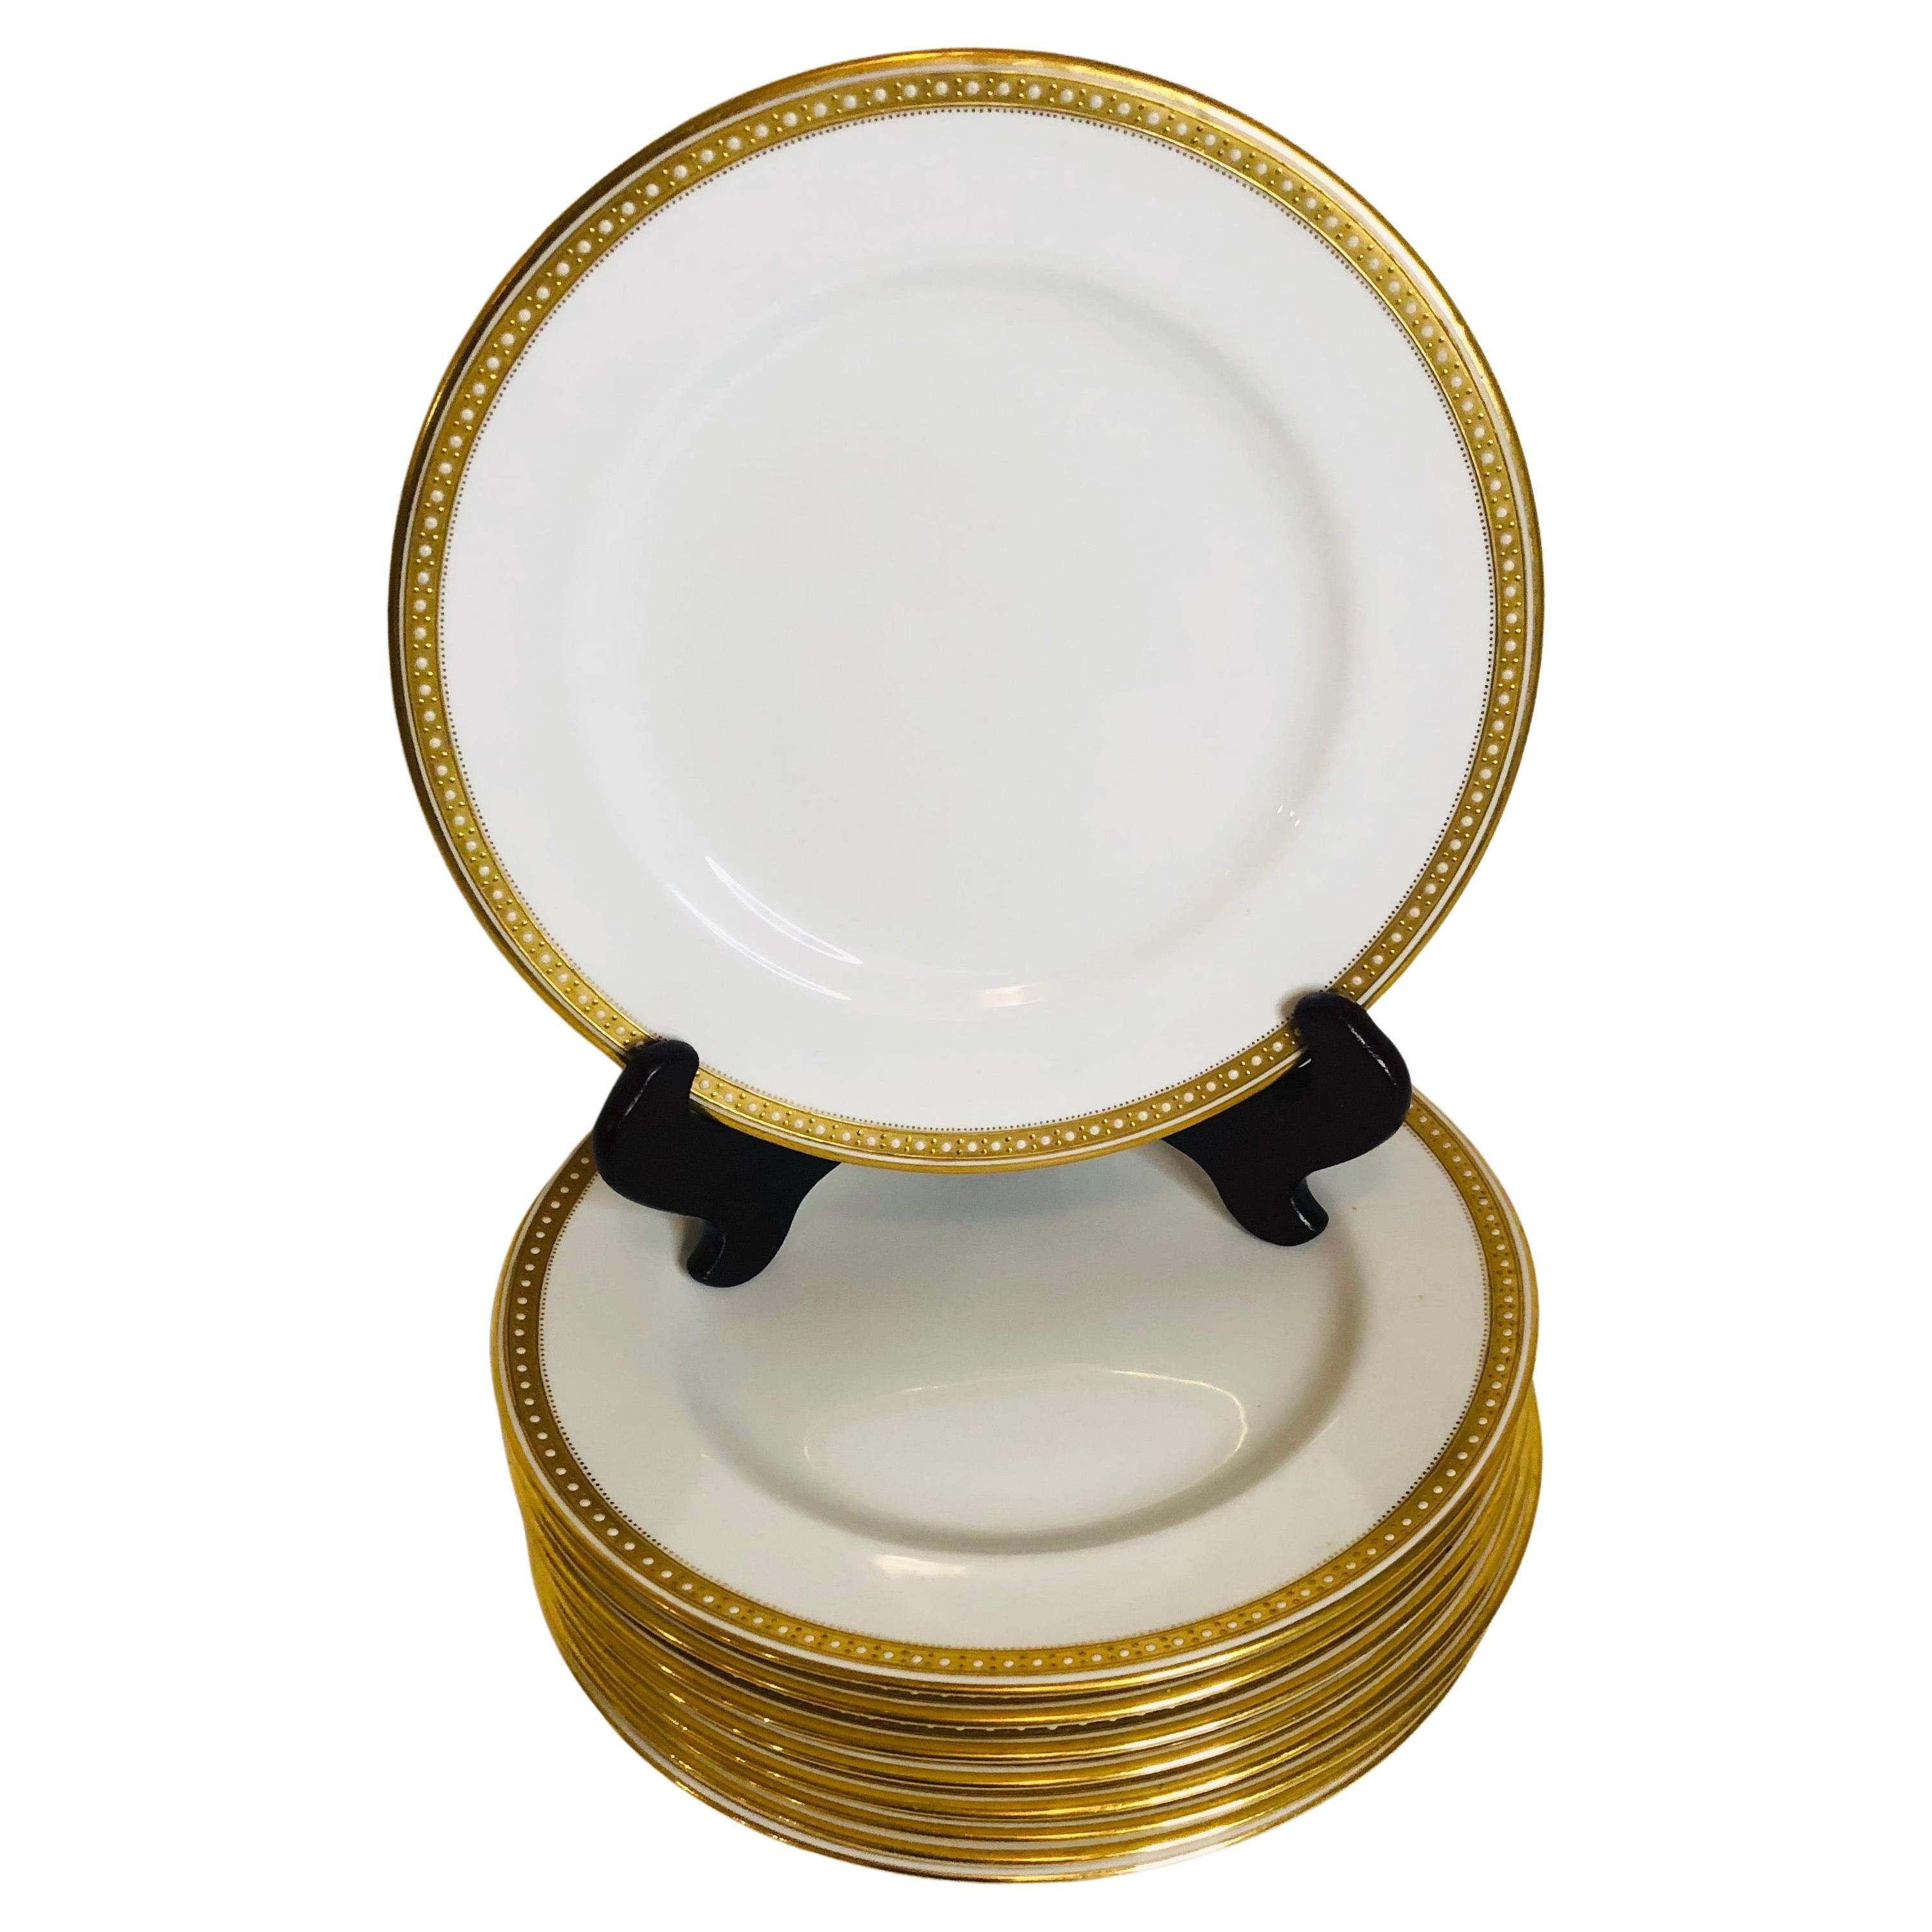 16 Copeland Spode Dinner Plates with Gold Rim & White Jeweling Made for T. Goode